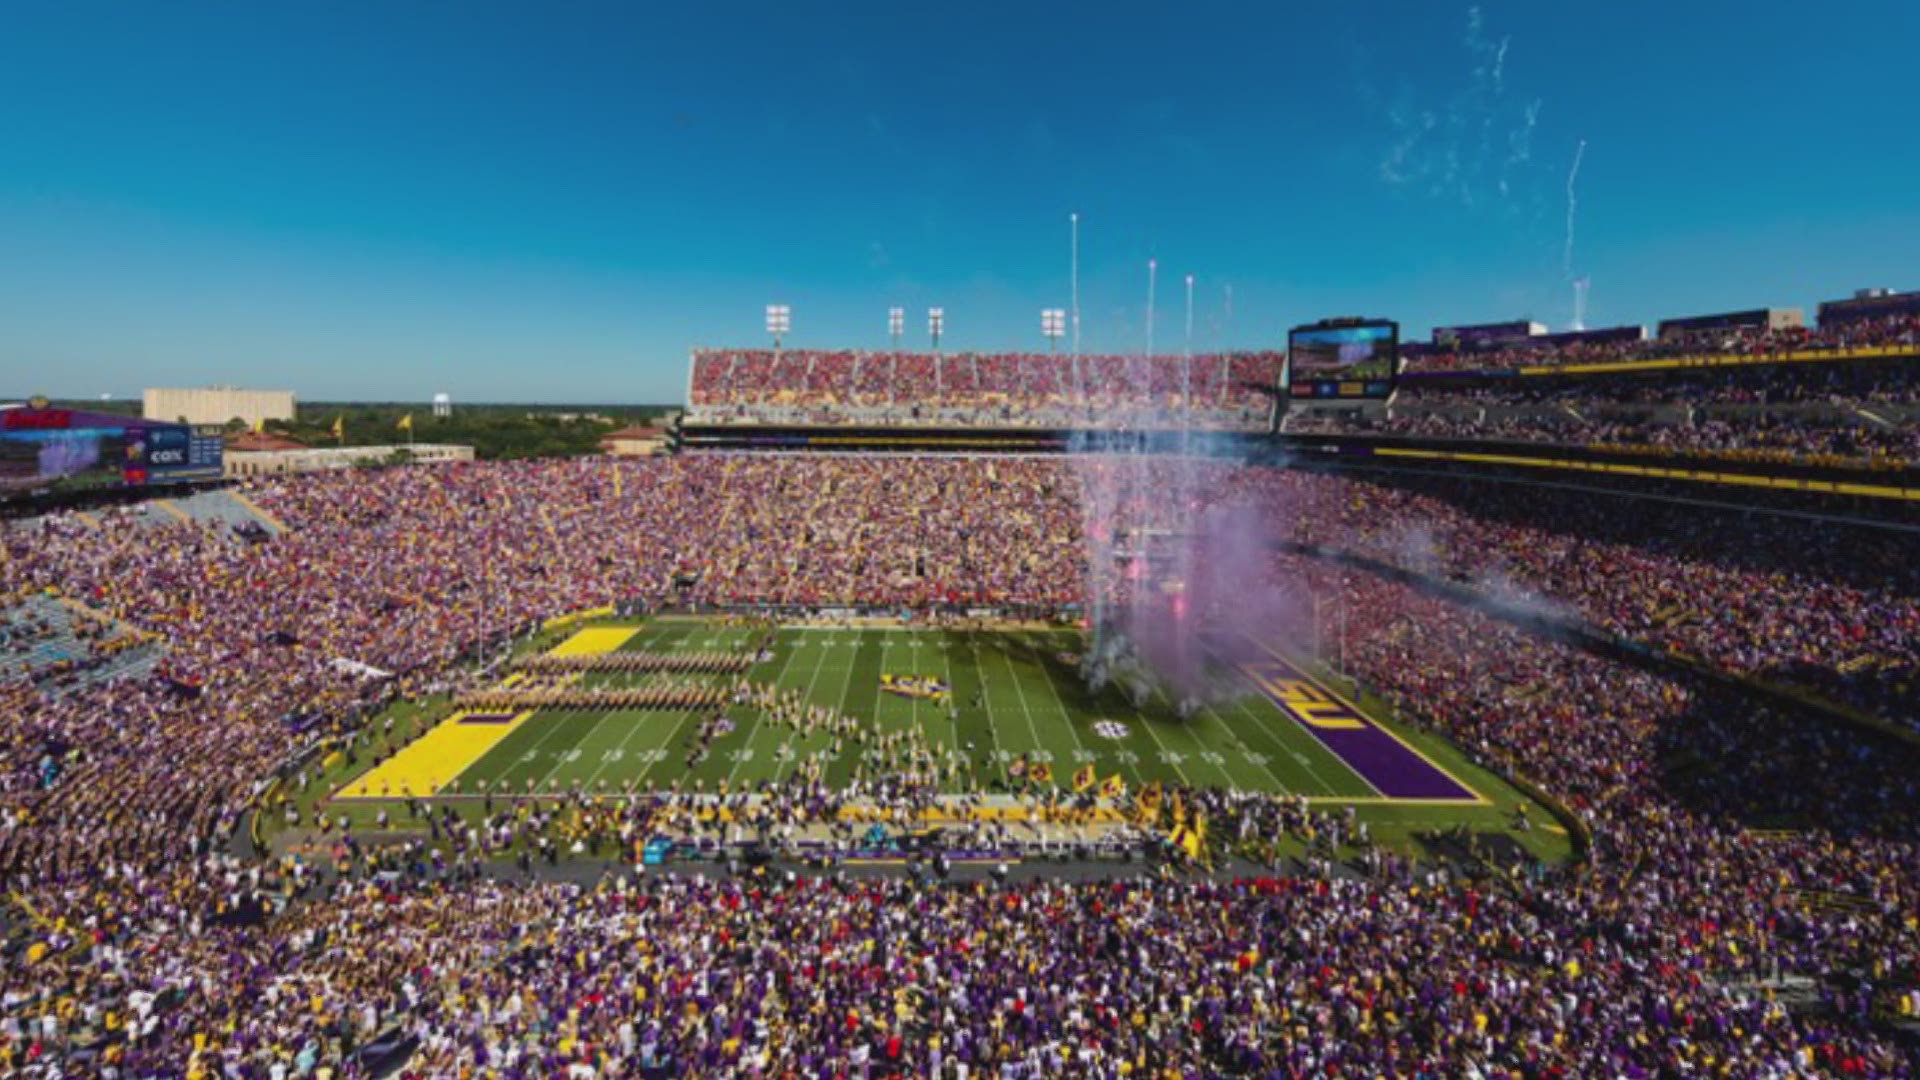 LSU has dropped the mask mandate at sporting events also allowing attendees to tailgate without restrictions.